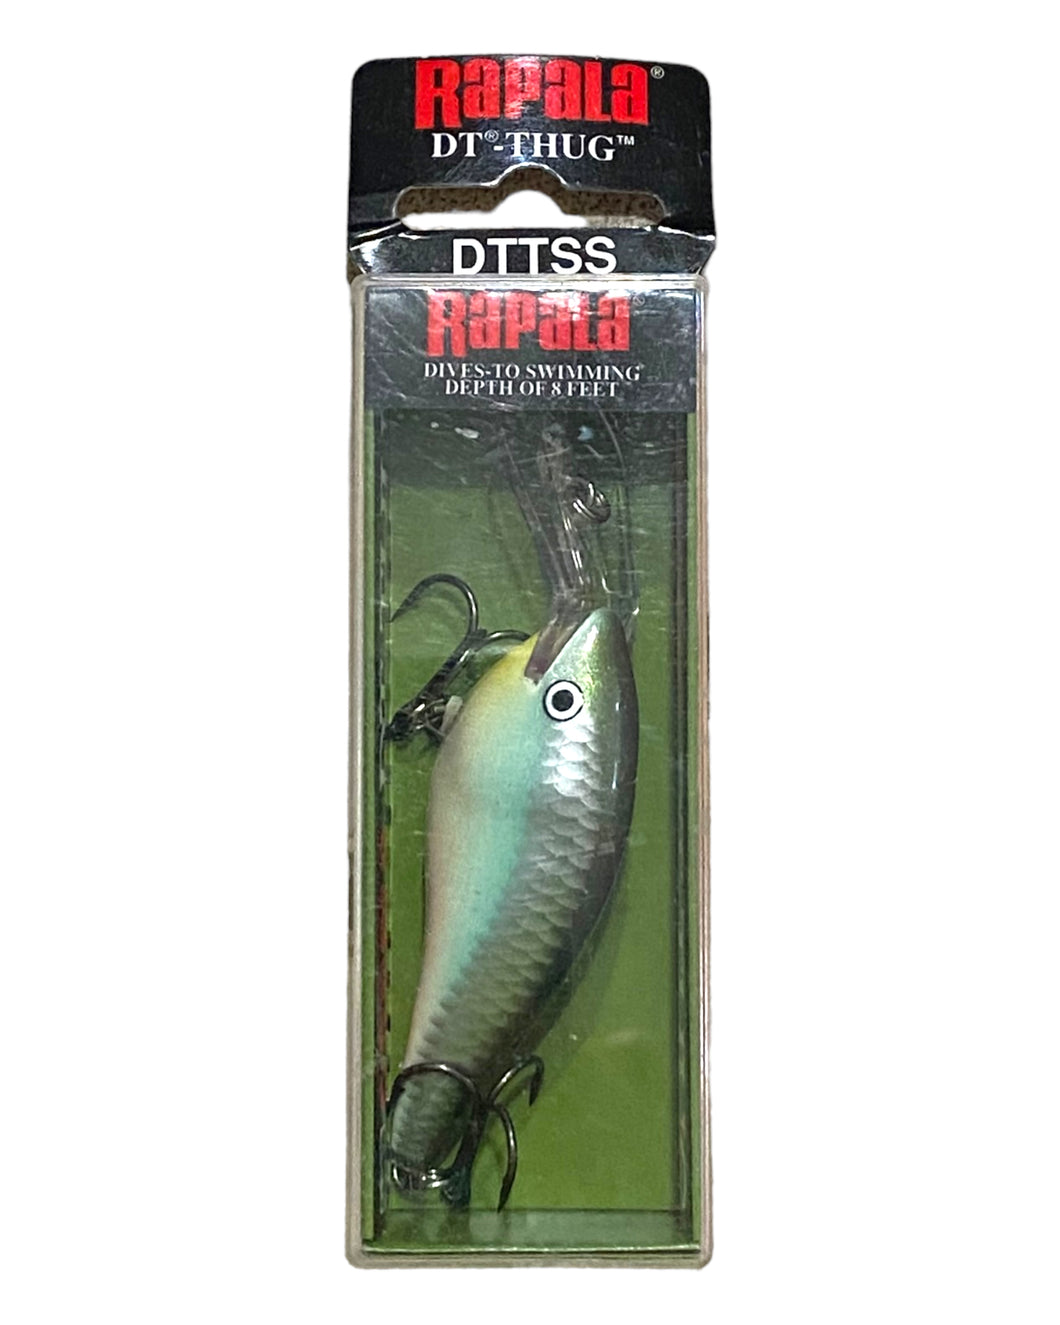 Front Package View of RAPALA DT THUG (Dives To) Fishing Lure in BLUE BACK HERRING